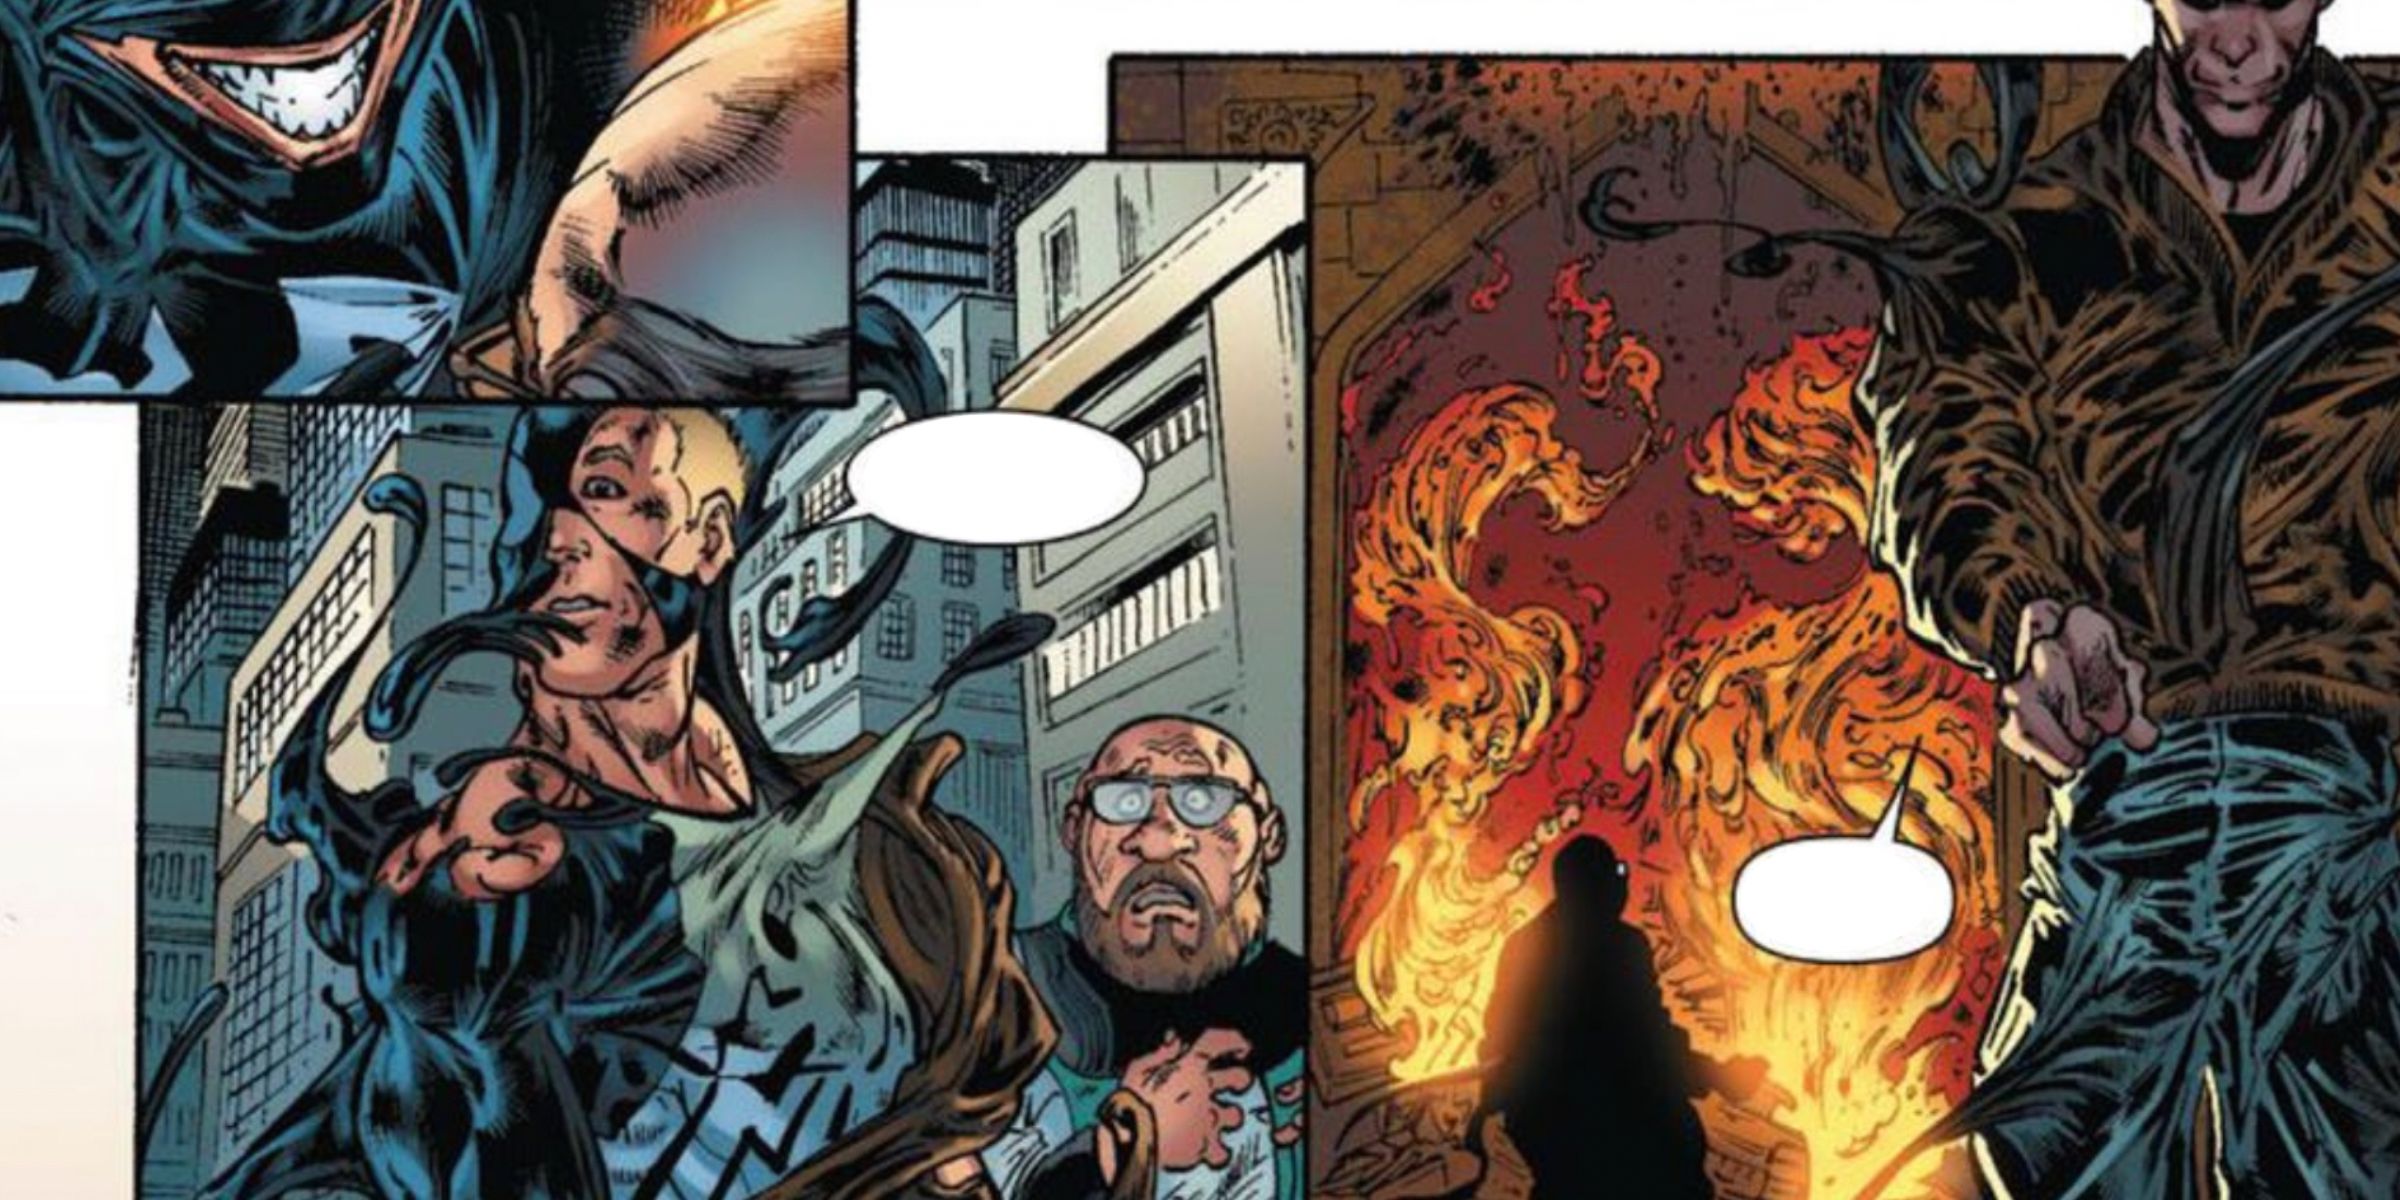 In a selection from a Marvel comic book panel, Venom changes his host's clothing and face to blend in